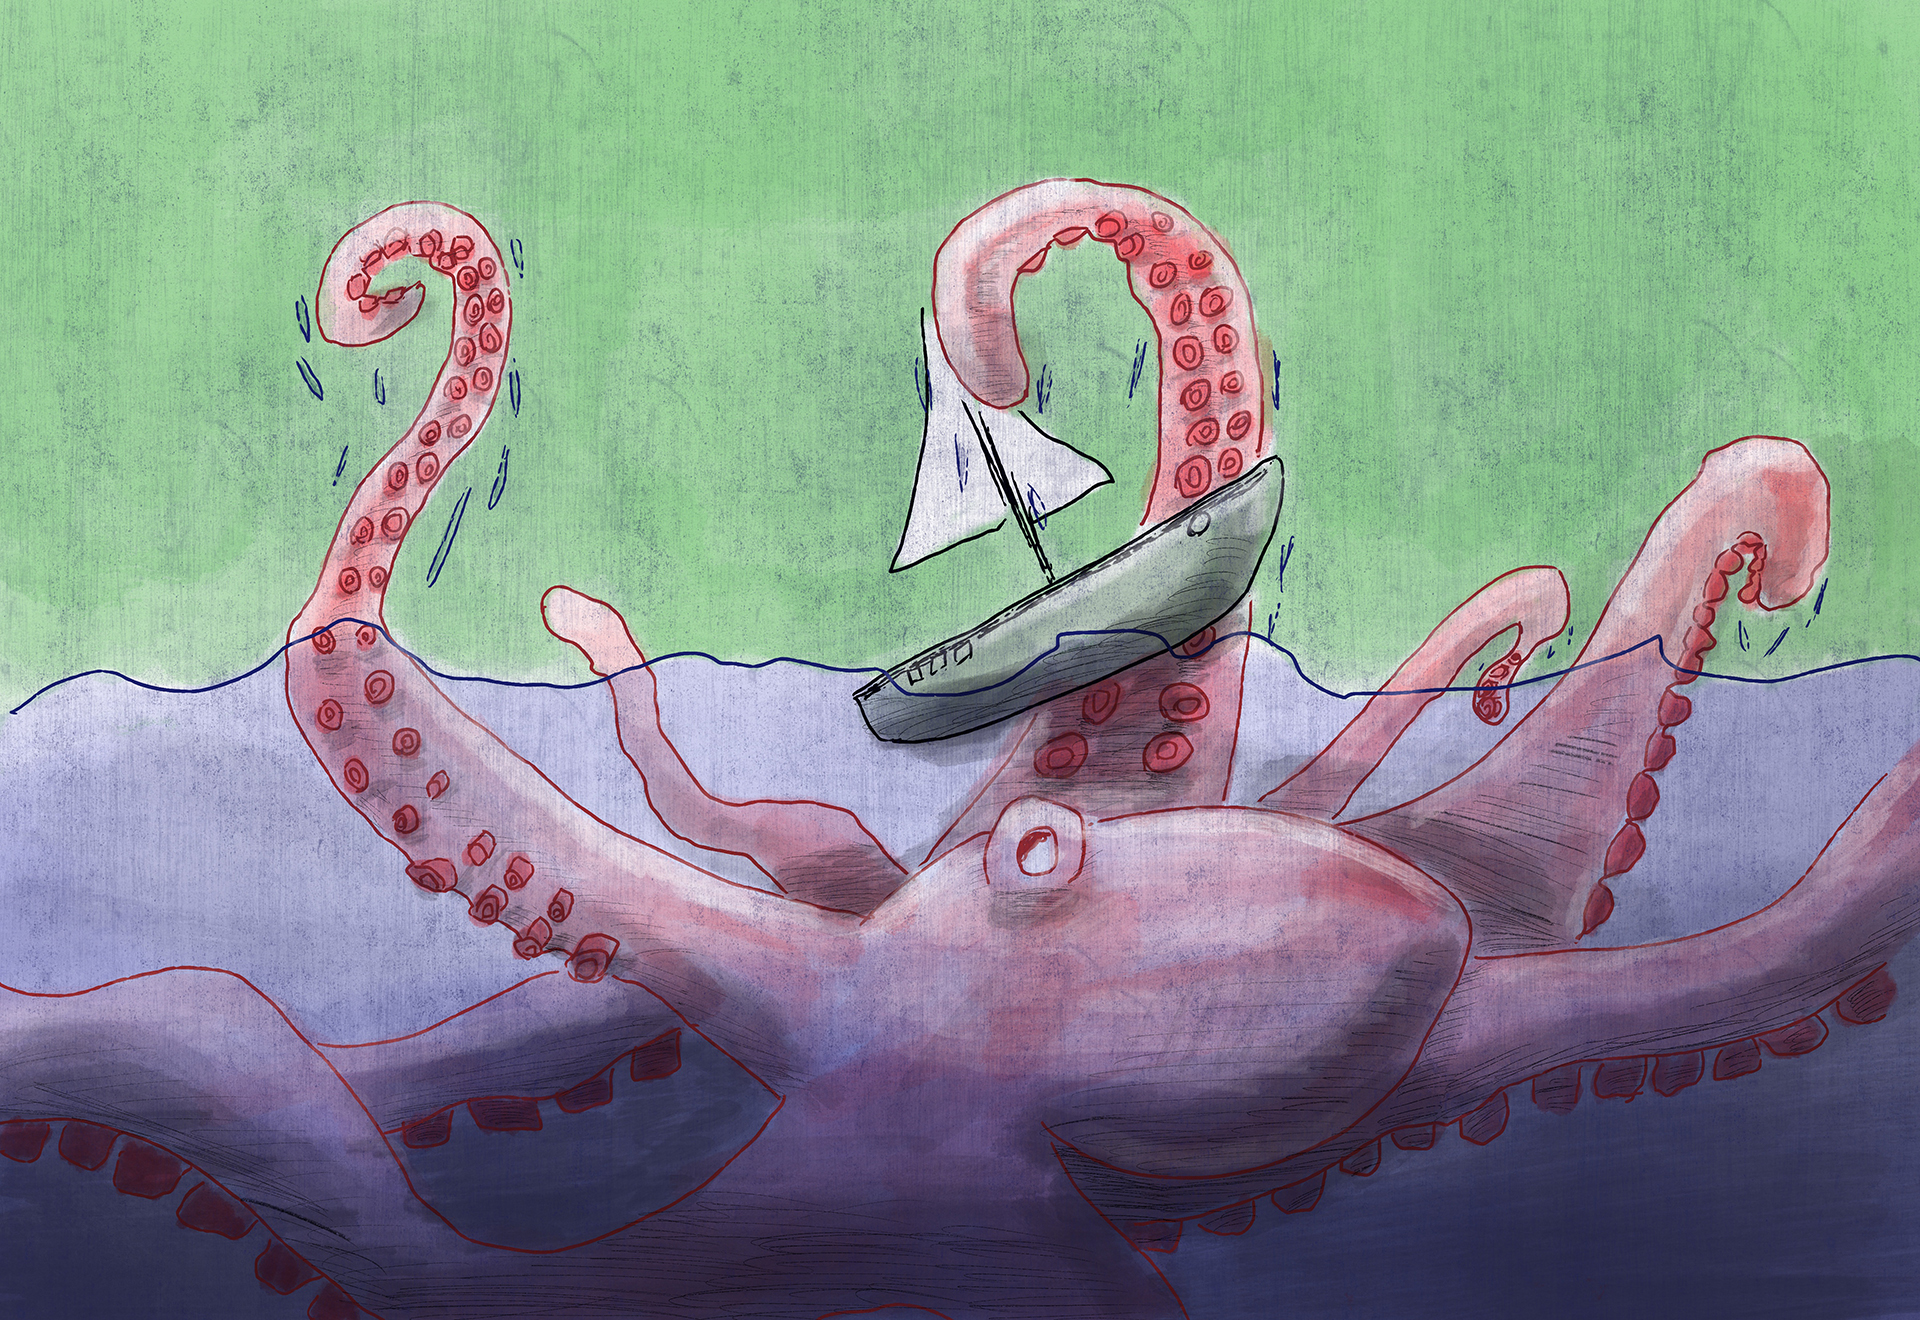 A drawing of an octopus with a sail boat